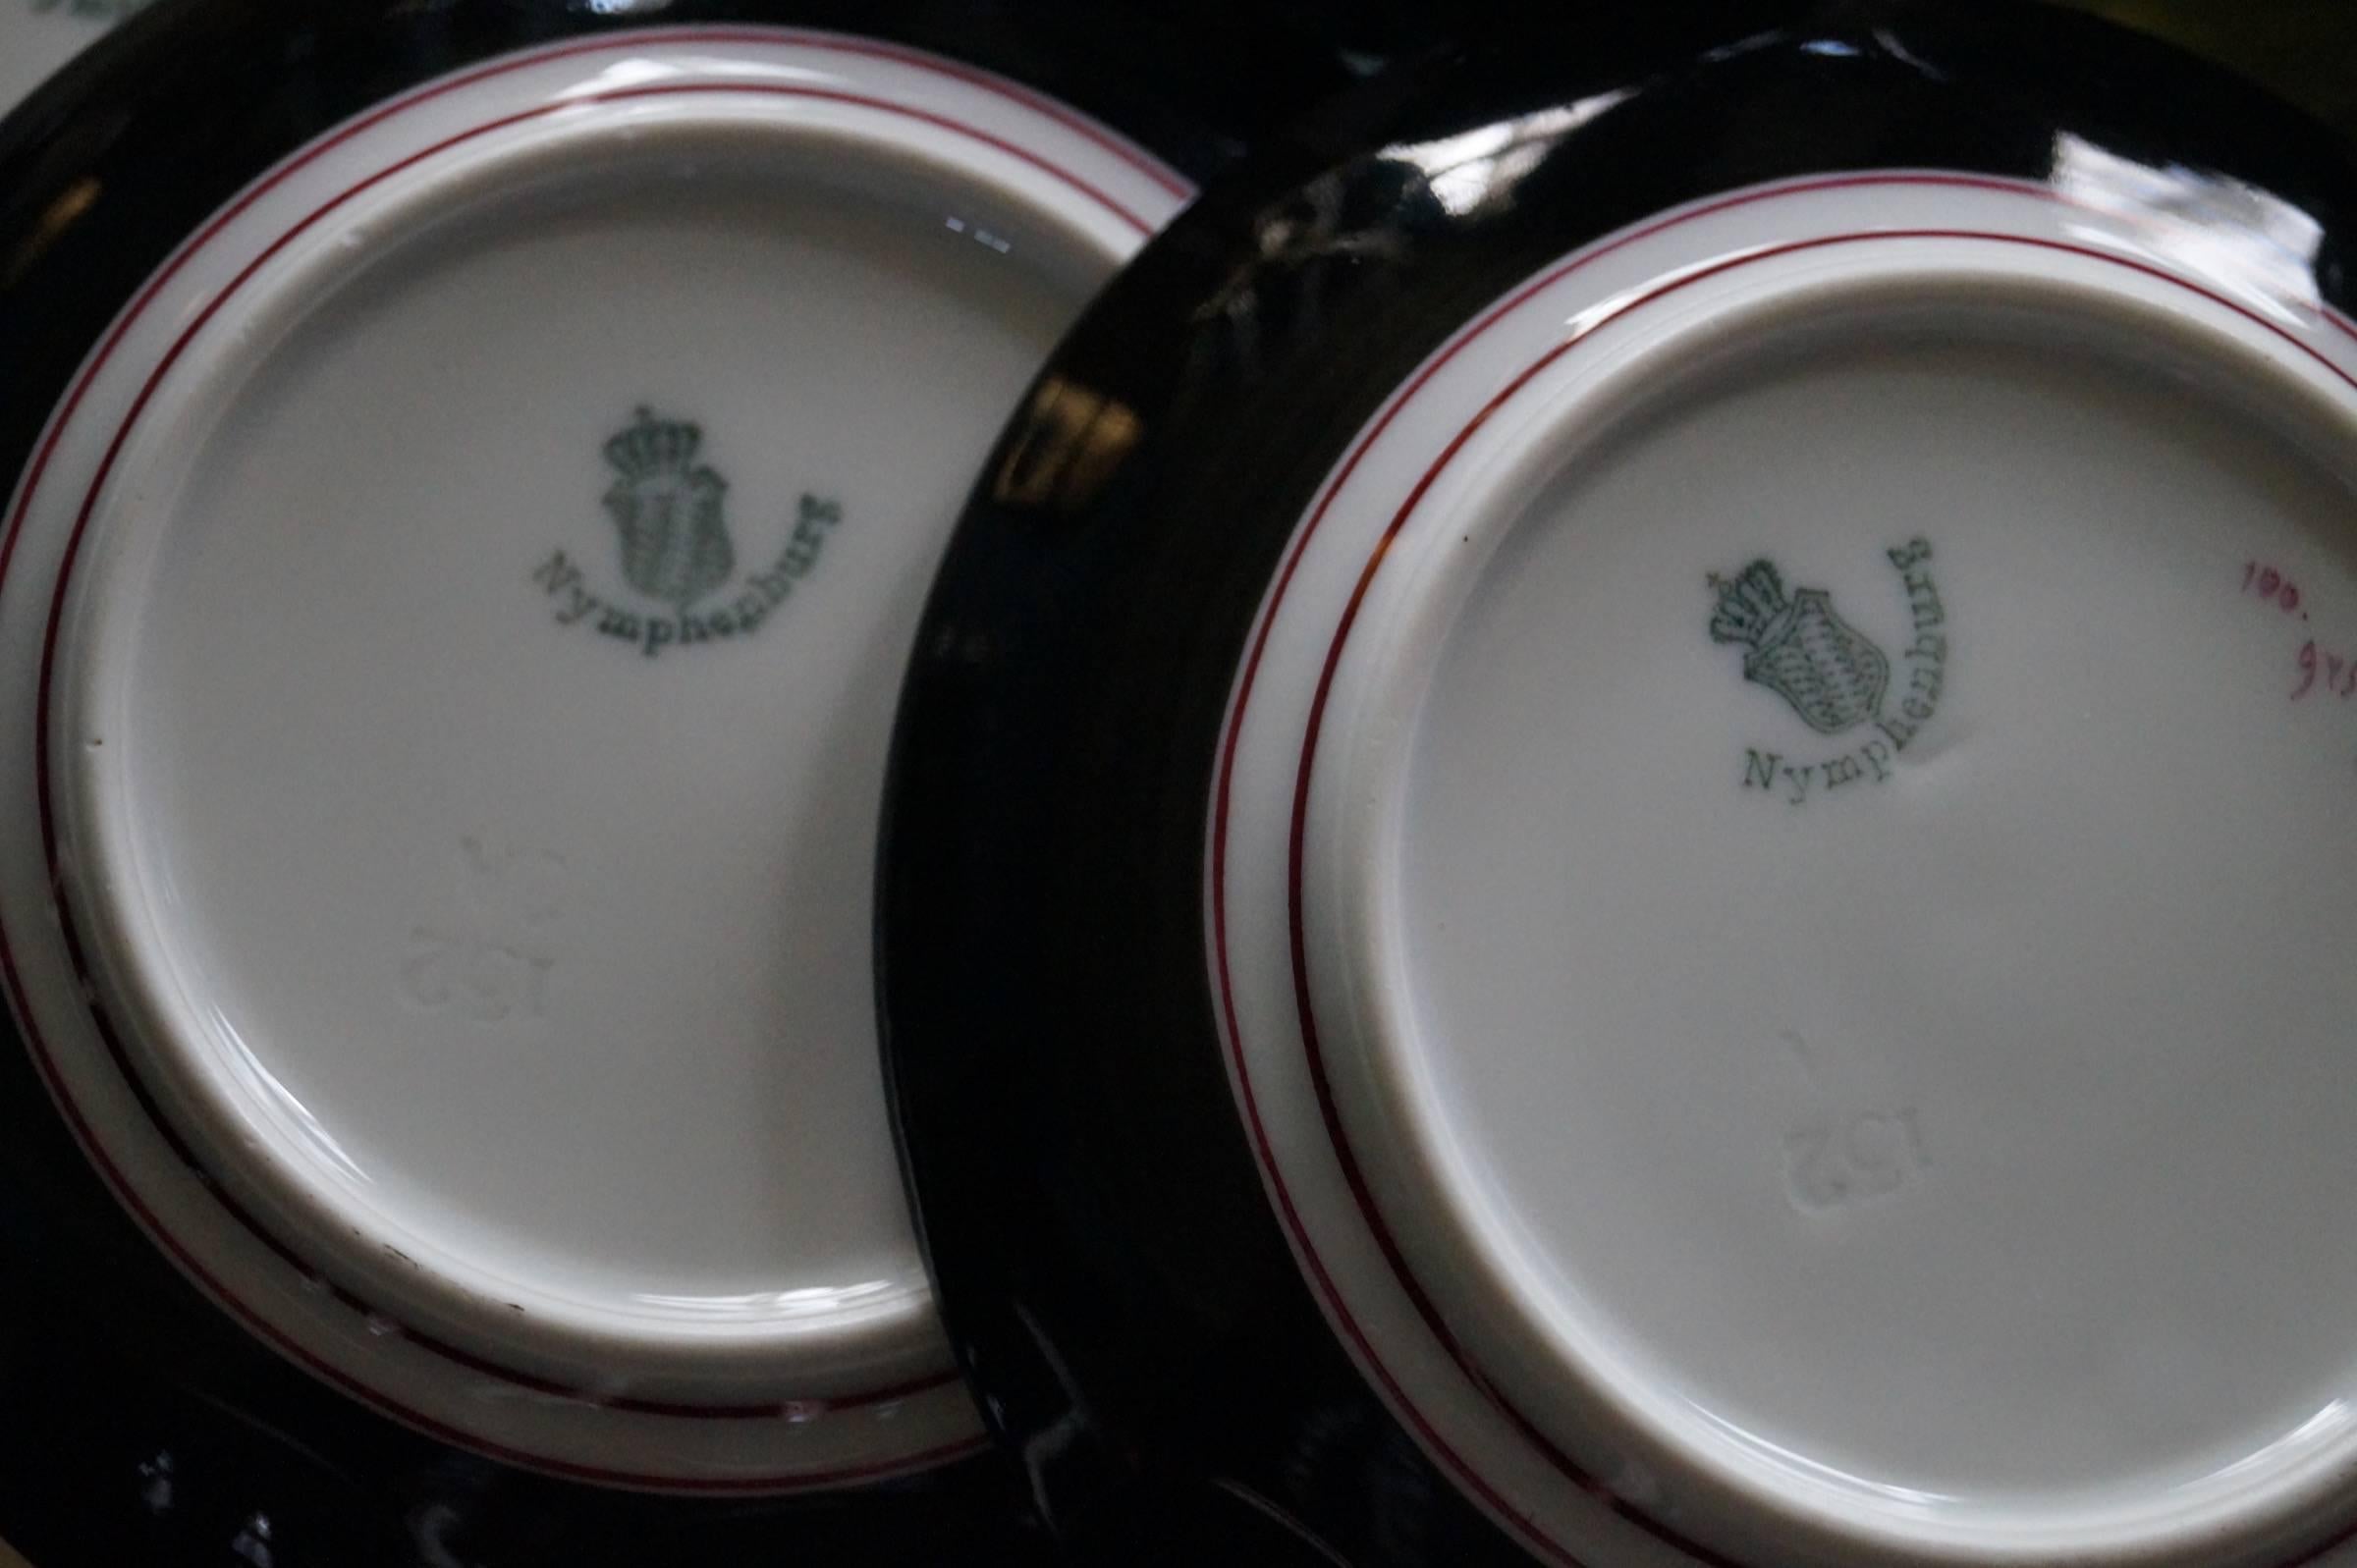 Late 19th Century Nymphenburg Porcelain Demitasse Cups and Saucers 1